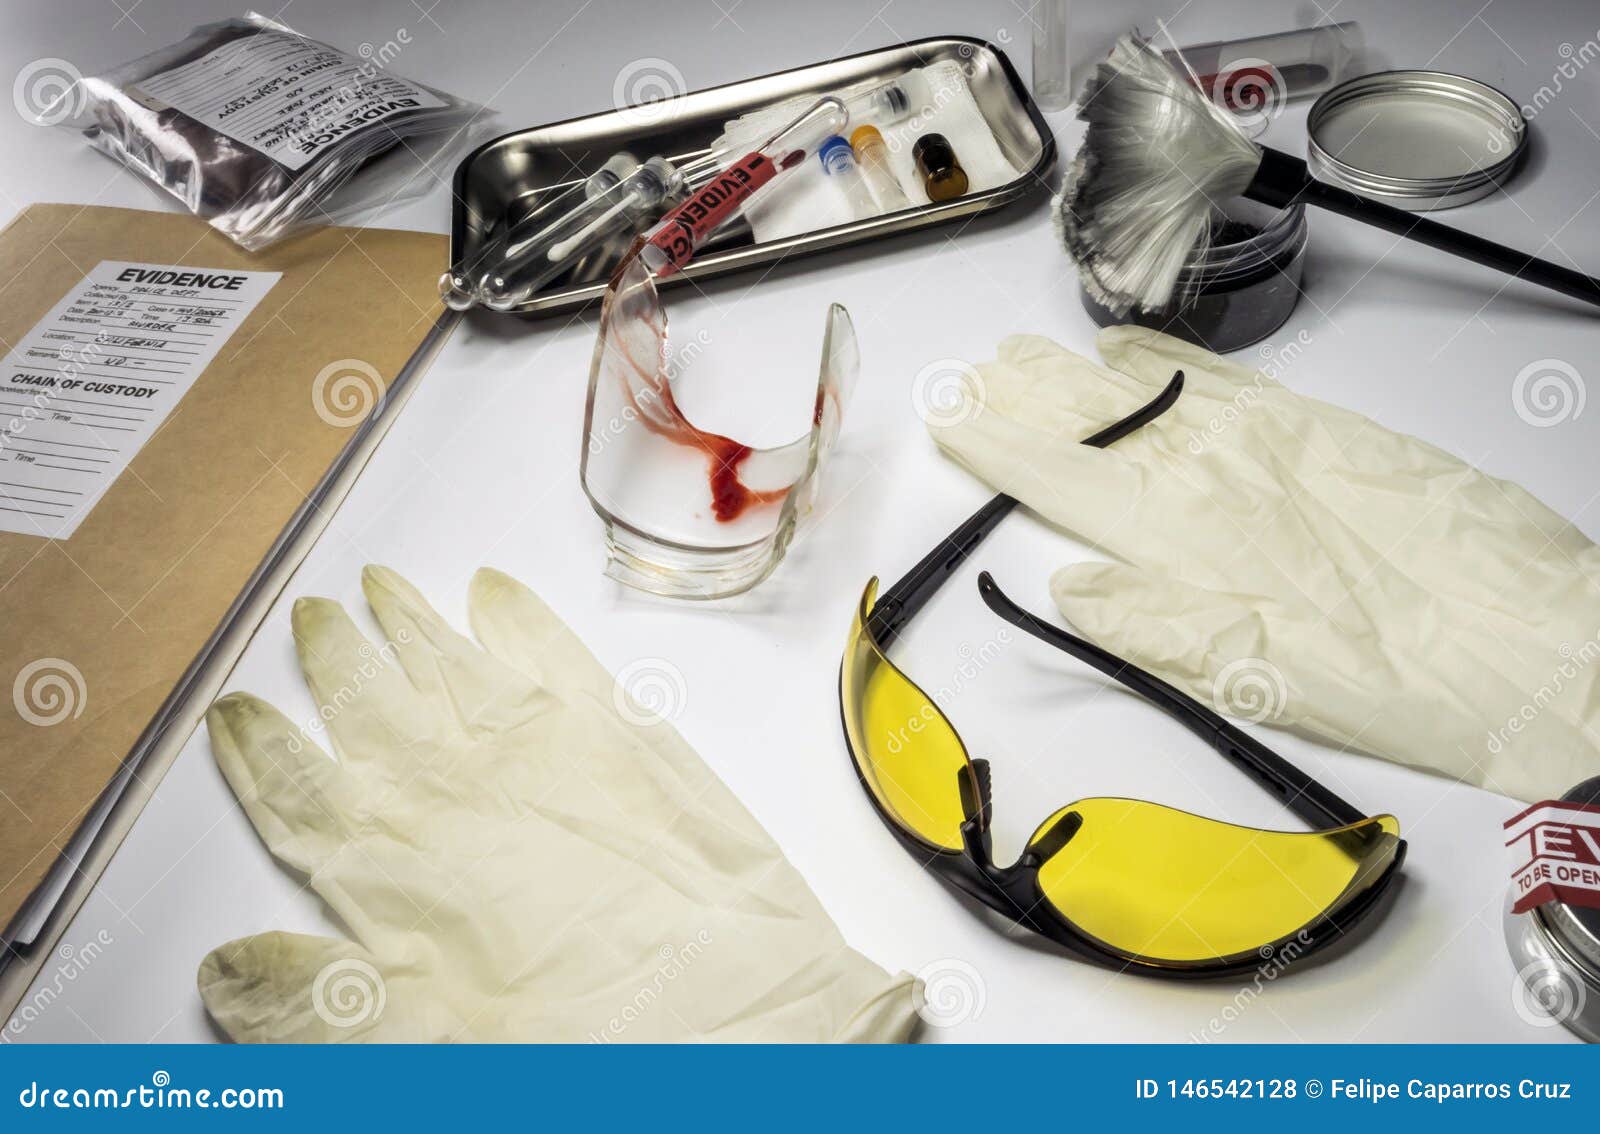 police record along with some forensic evidence of murder at laboratorio forensic equipment